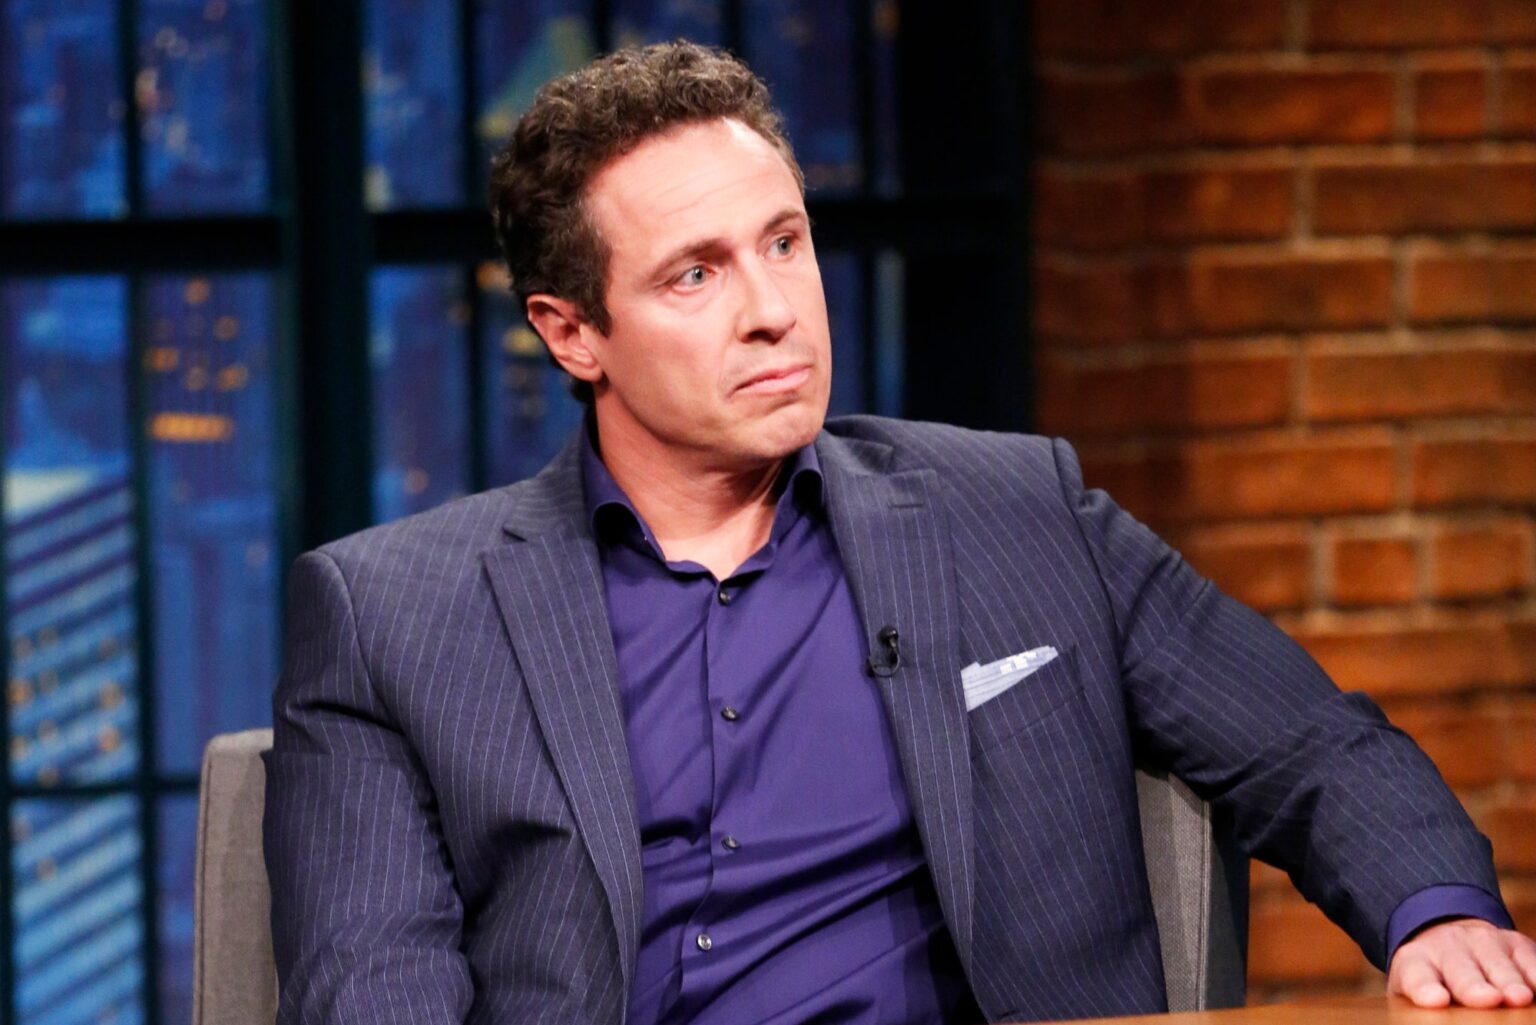 How much is "the face of CNN" really worth? Get all the details on how news anchor Chris Cuomo earns his net worth.